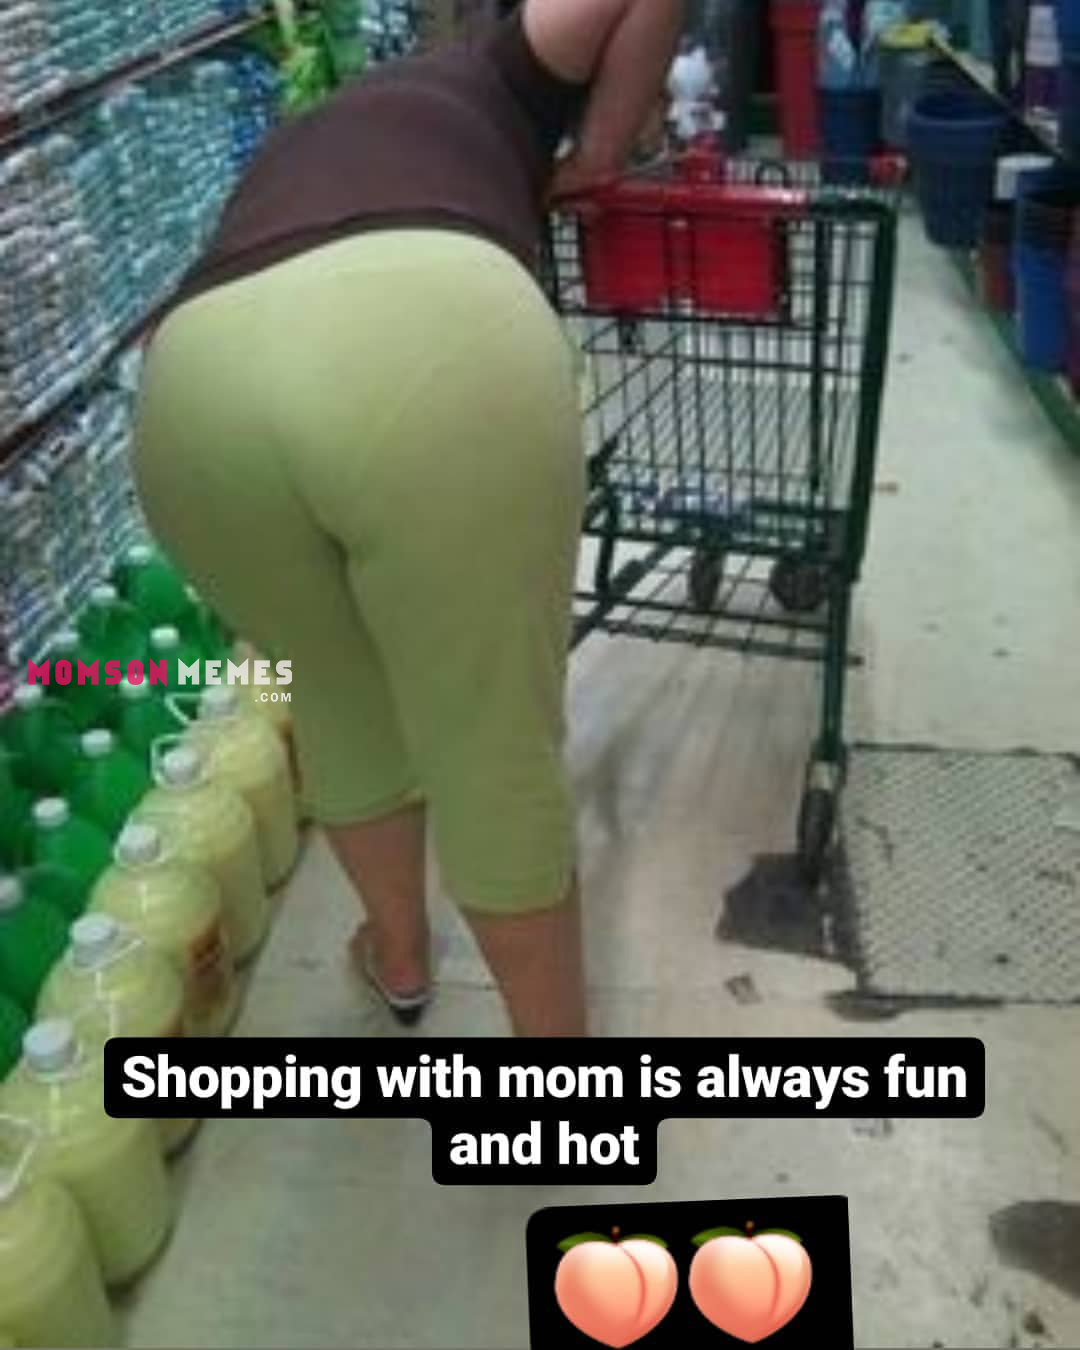 Shopping with mom is always fun!